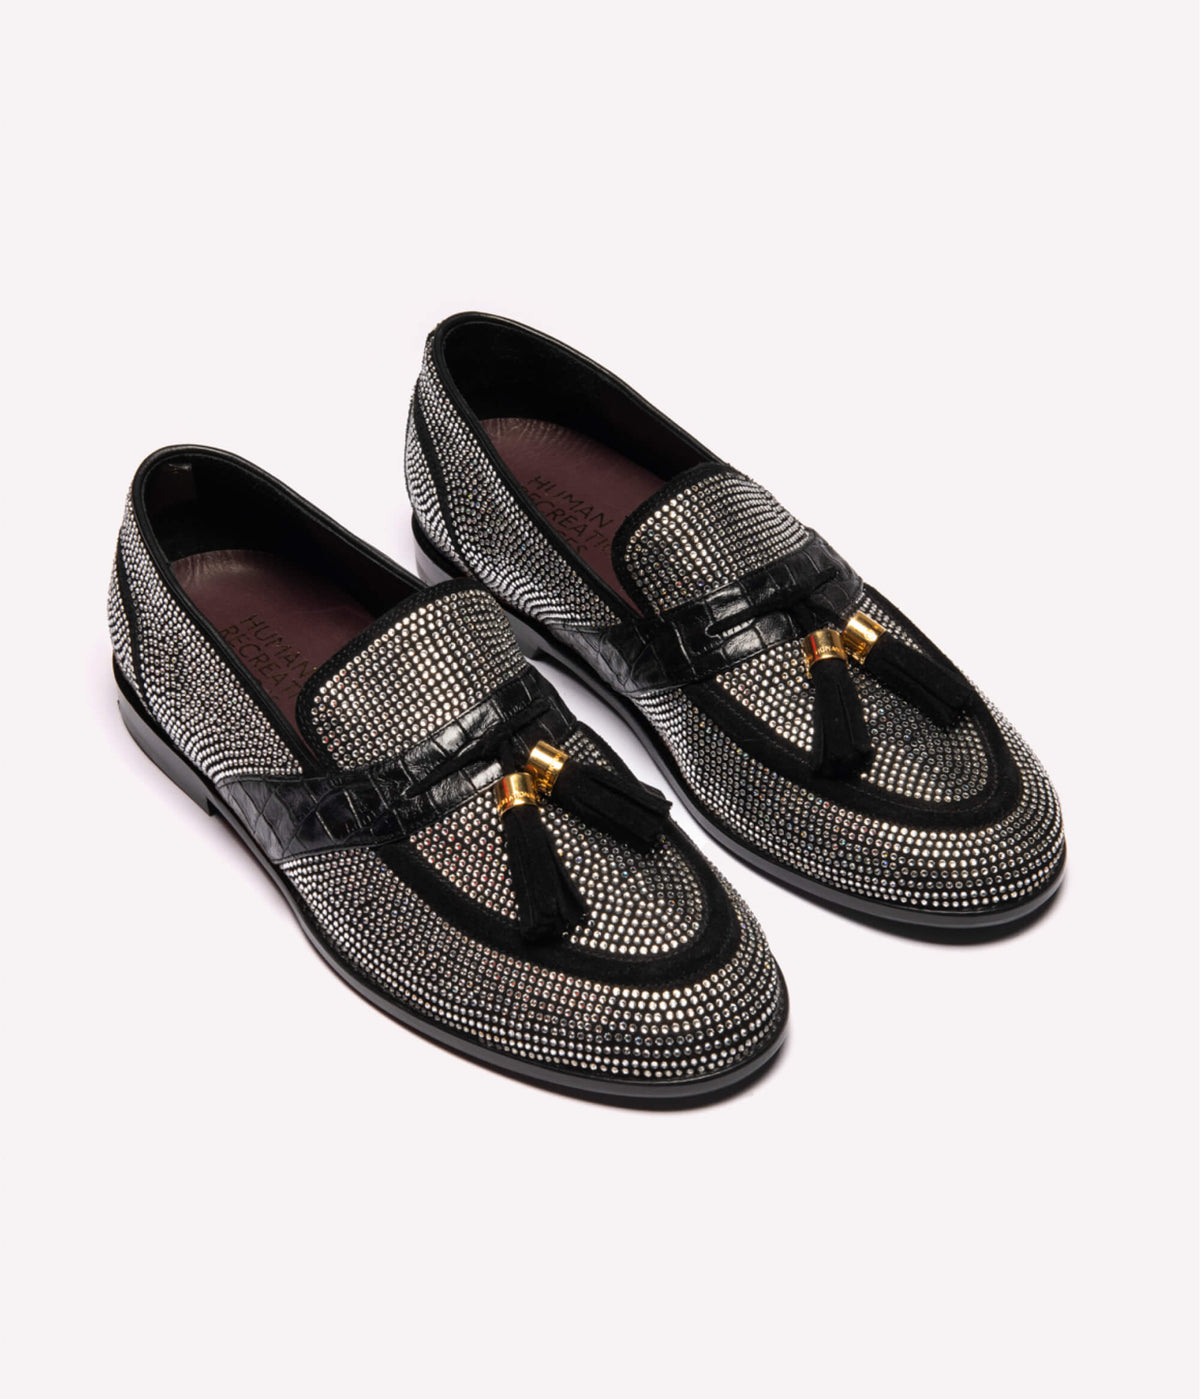 HUMAN RECREATIONAL SERVICES DEL REY LOAFER IN CRYSTAL-ENCRUSTED ITALIAN CALFSKIN SUEDE